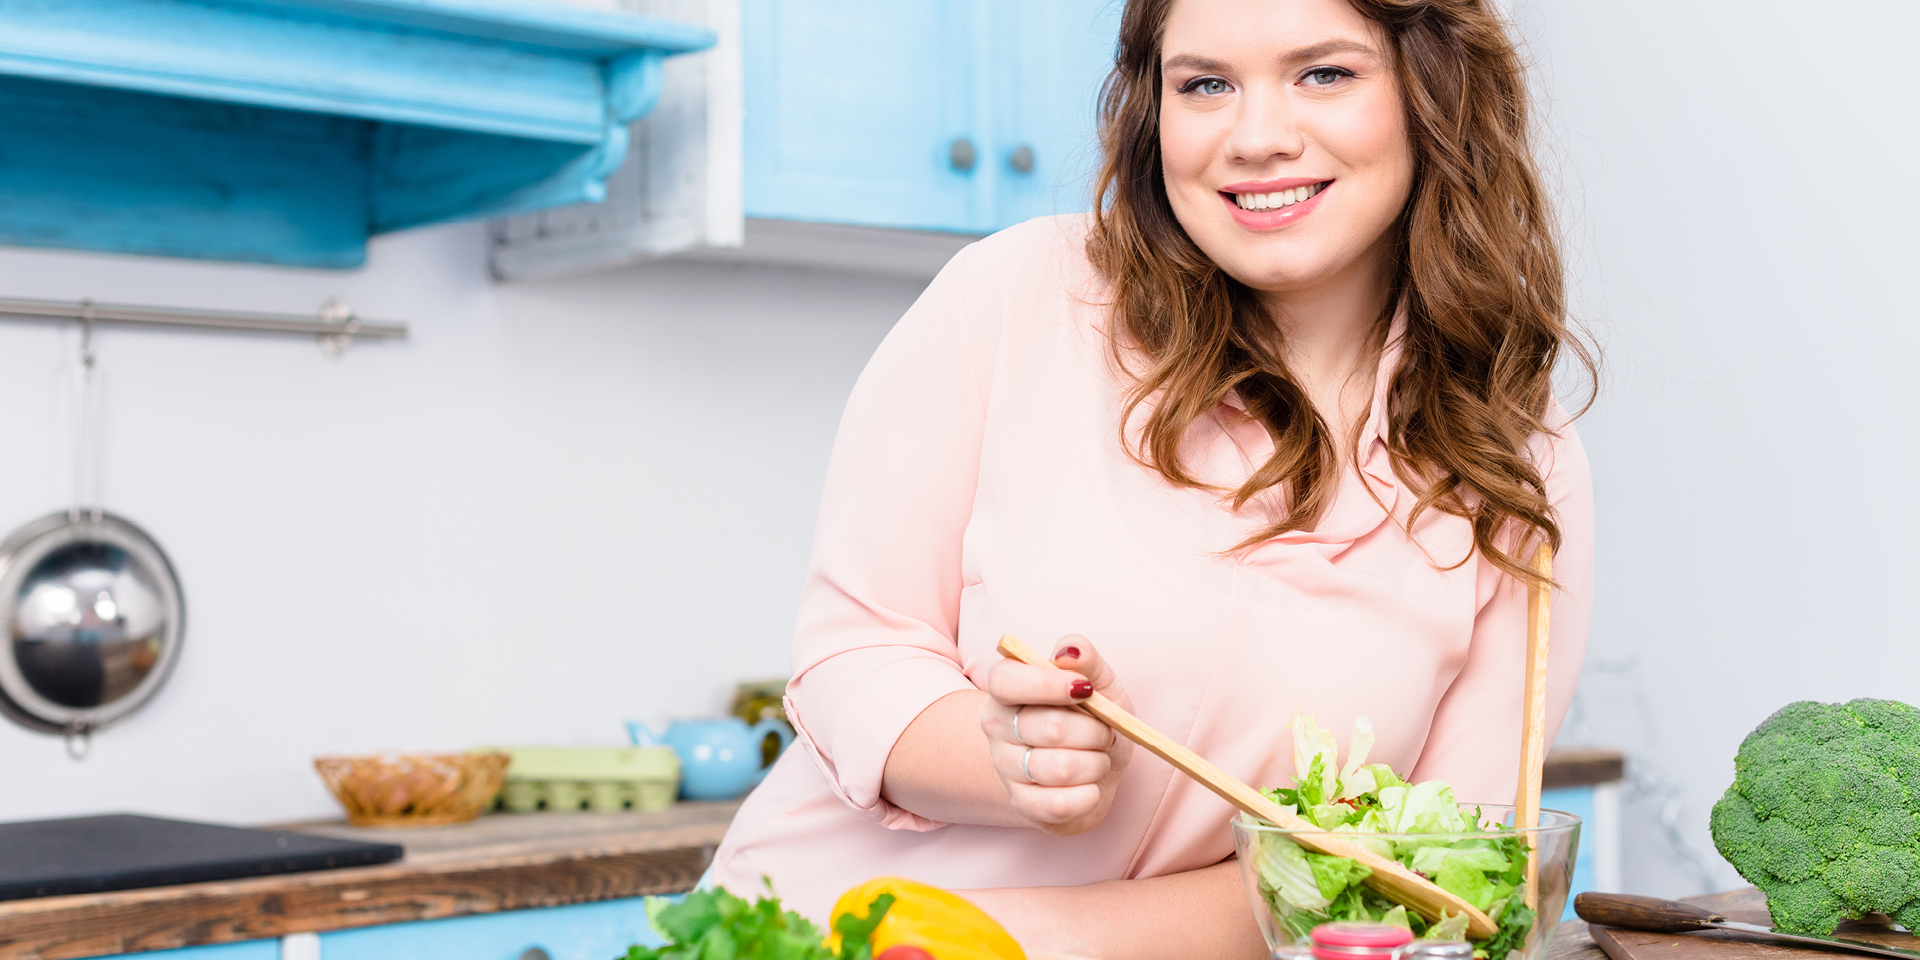 Woman in kitchen prepping salad